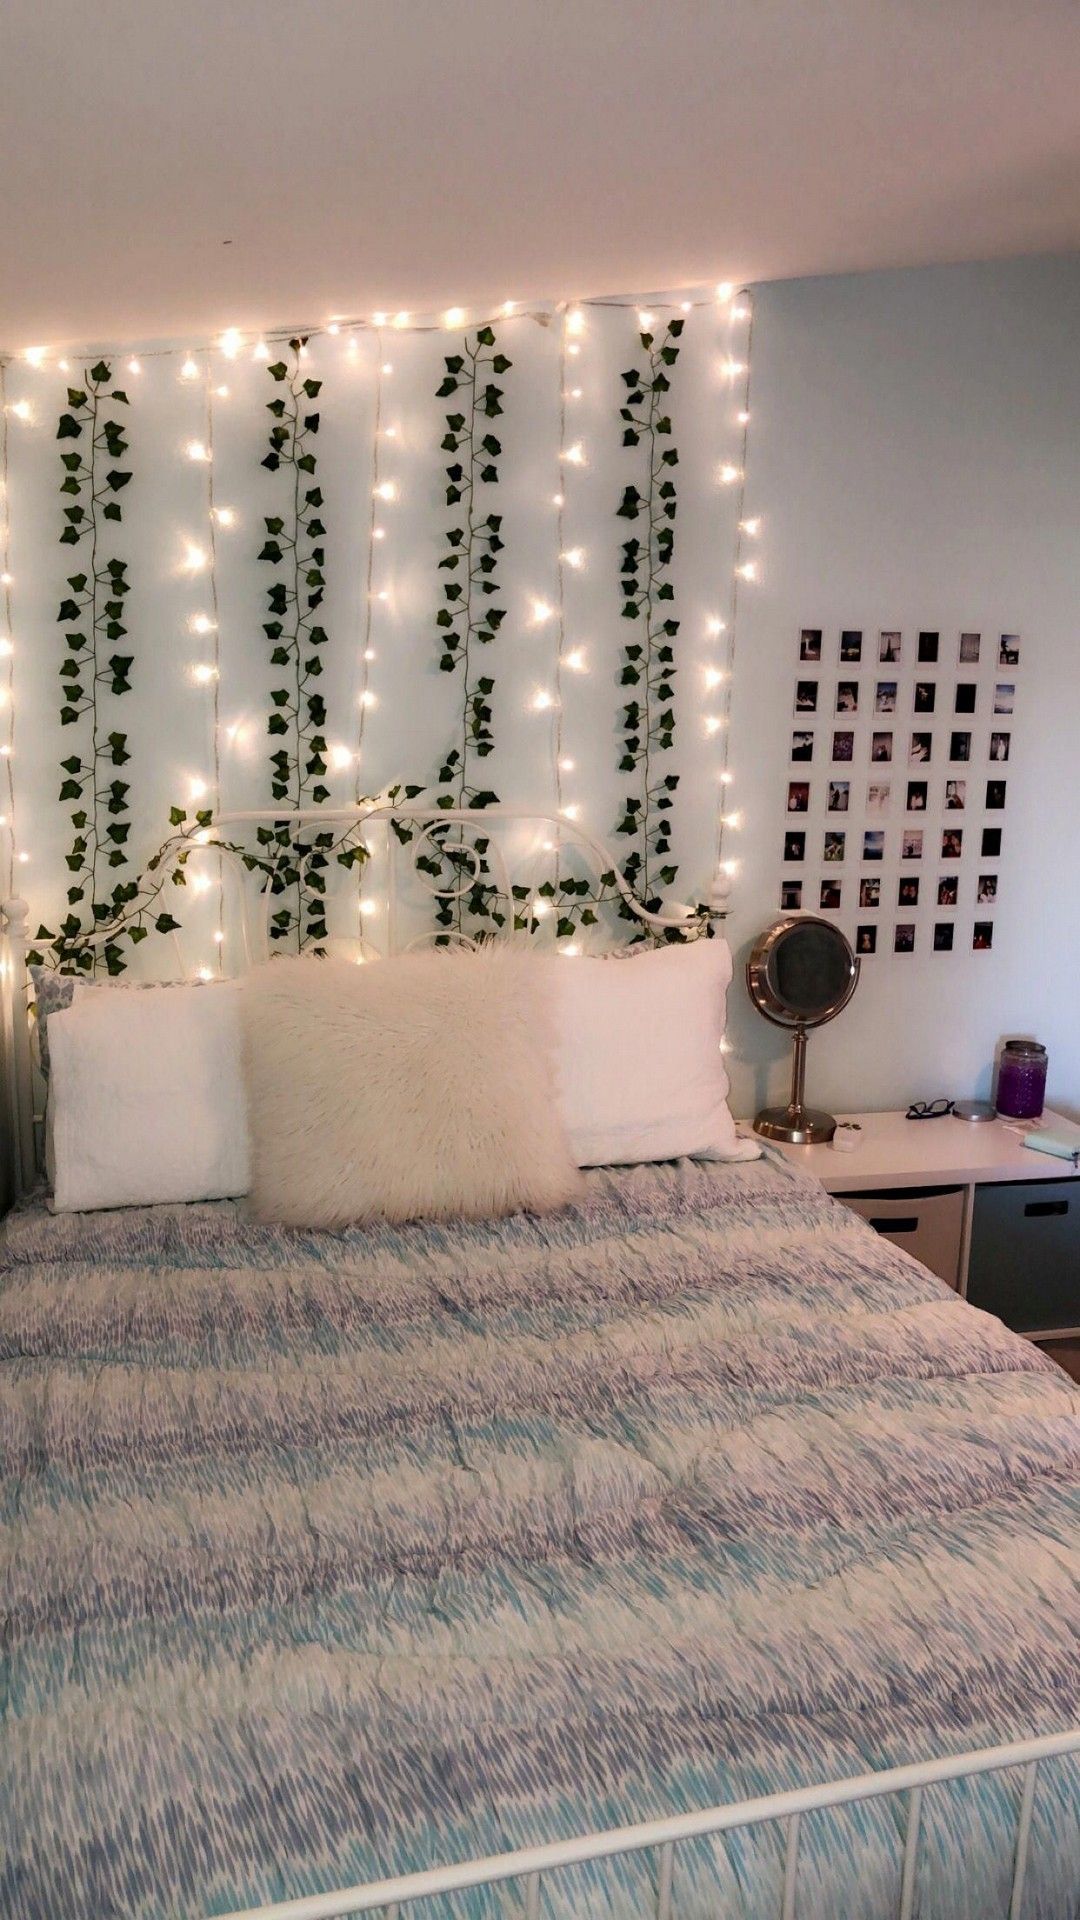 23 Cute Dorm Room Decor Ideas On This Page That We Just Love